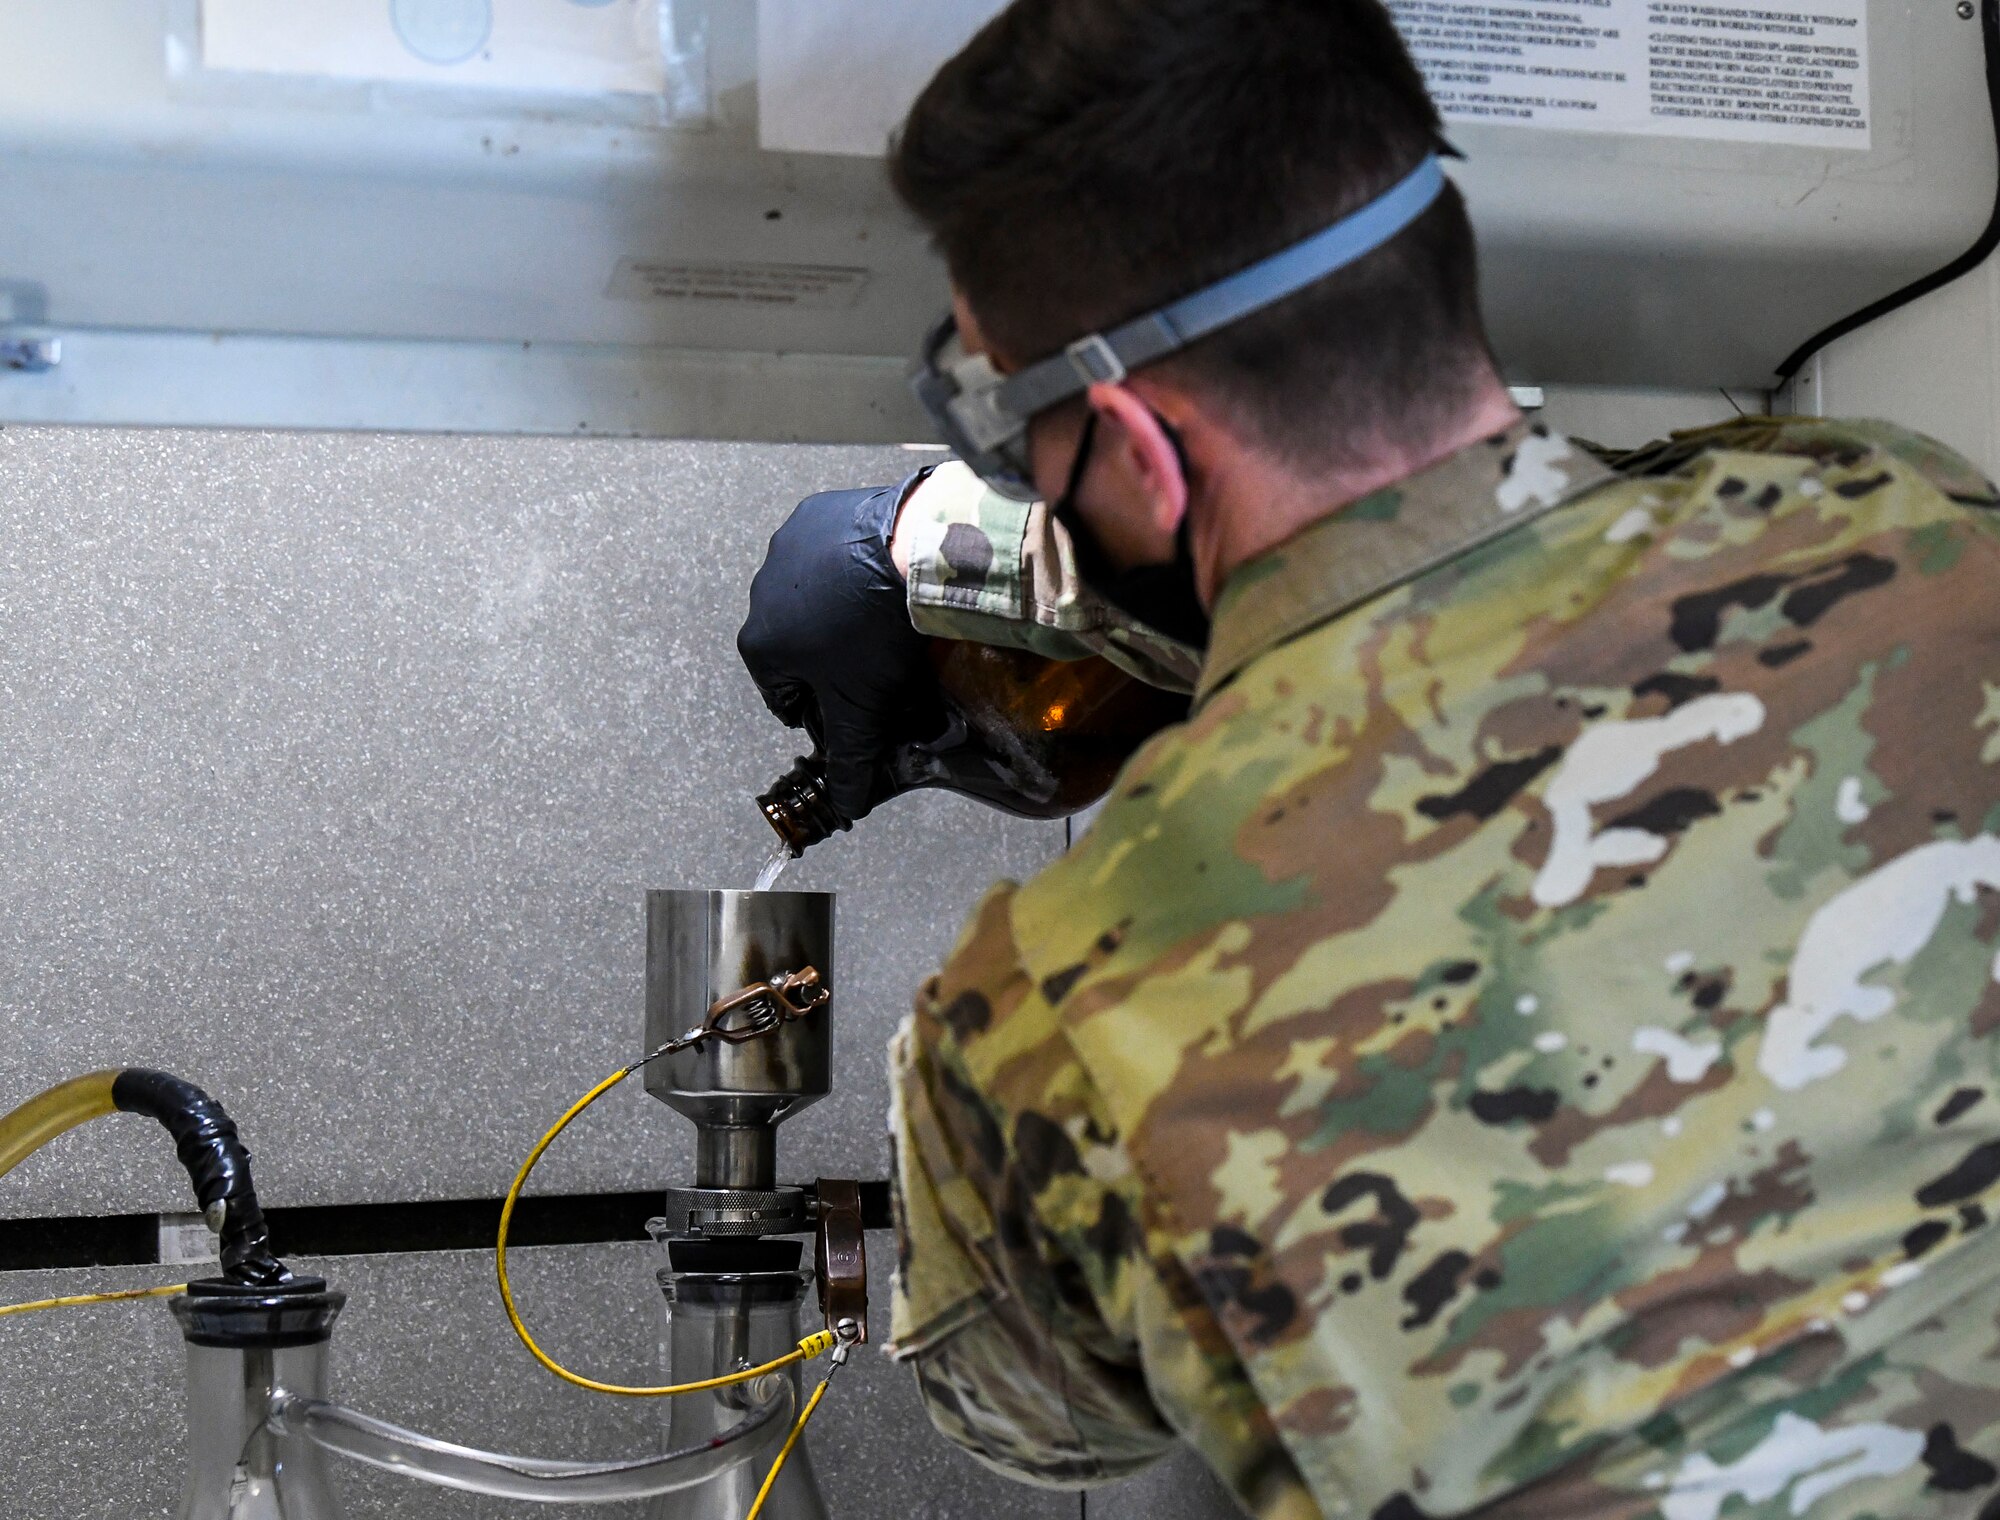 Staff Sgt. Brian Elrod, 436th Logistics Readiness Squadron fuels laboratory noncommissioned officer in charge, pours fuel into a bottle-method funnel during the fuel testing process at Dover Air Force Base, Delaware, Jan. 12, 2021. The bottle-method test measures levels of water, additives, sediment and particulates in fuel to ensure all aircraft receive the cleanest fuel possible. (U.S. Air Force photo by Airman 1st Class Stephani Barge)